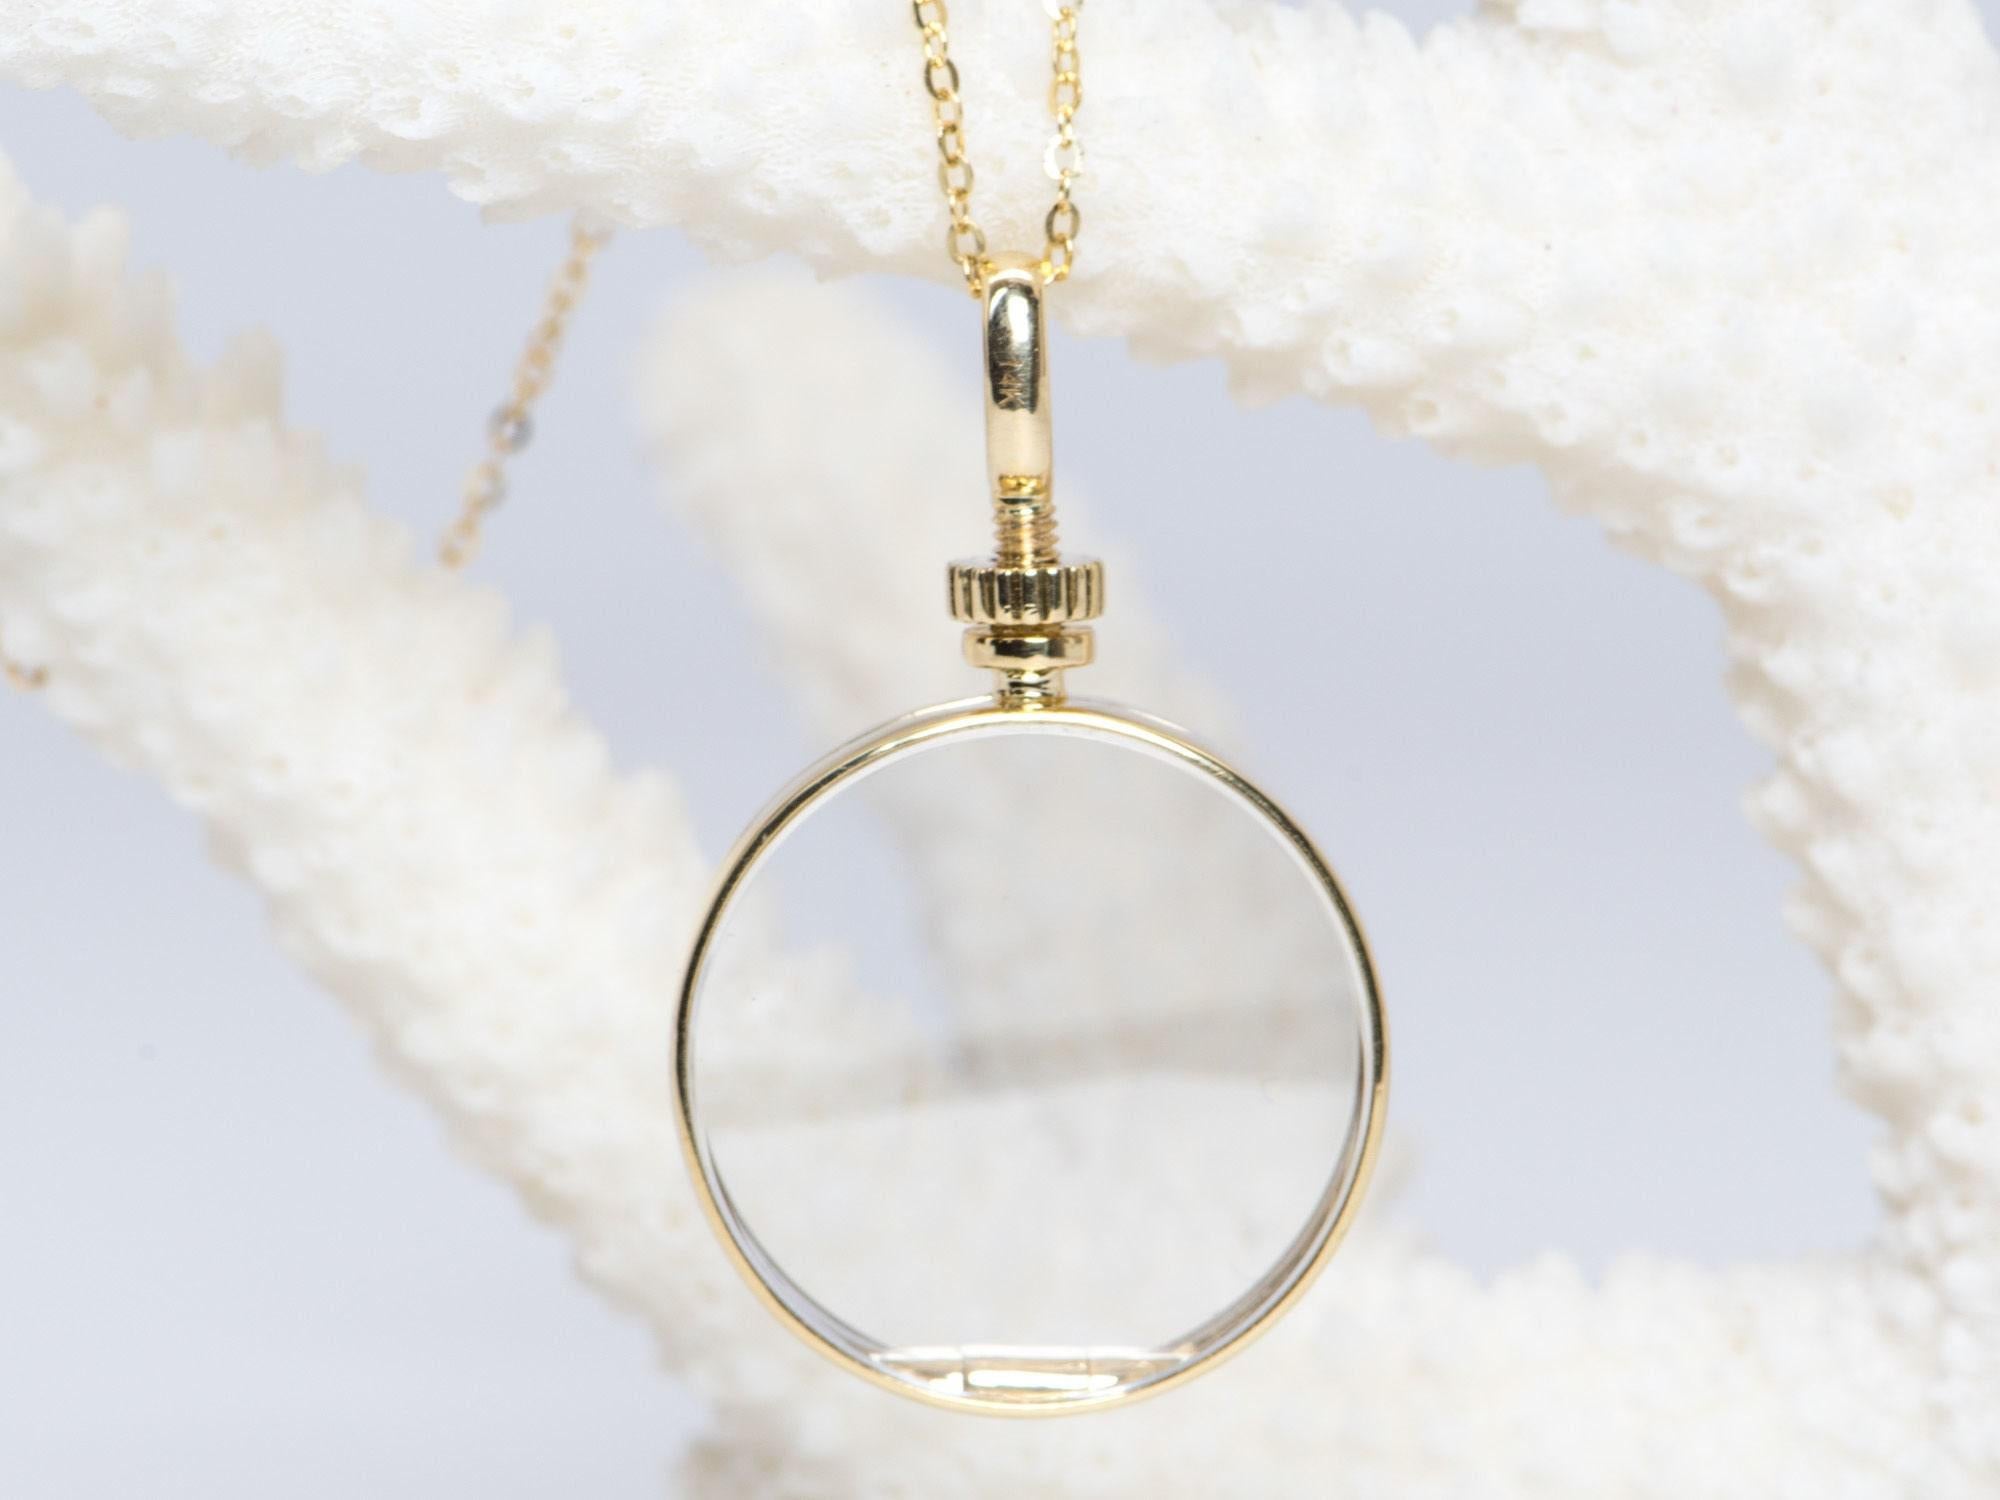 

♥ Solid 14K Gold Shaker Locket Pendant with Openable Screw Top for Gemstones
♥ Solid 14k yellow gold pendant set with a beautiful -shaped
♥ Gorgeous color!
♥ The item measures 35 mm in length, 21.9 mm in width, and stands 6.4 mm thick

♥ Note: The